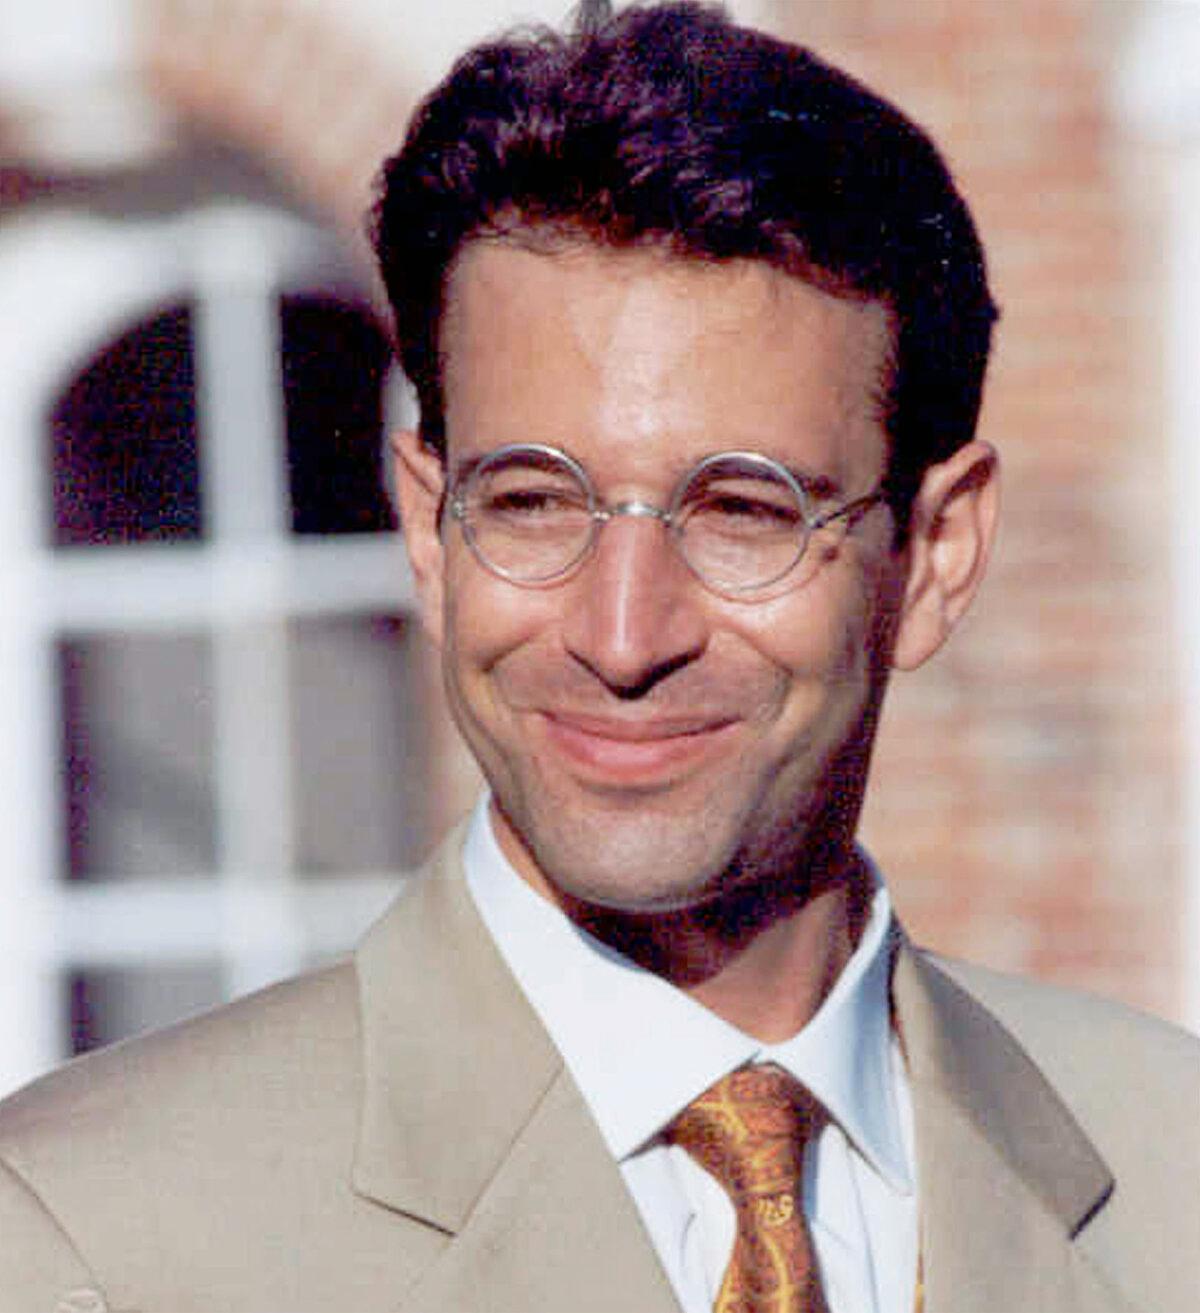 Daniel Pearl, a Wall Street Journal newspaper reporter kidnapped by Islamic extremists in Karachi, Pakistan, in a file photo. (Getty Images)